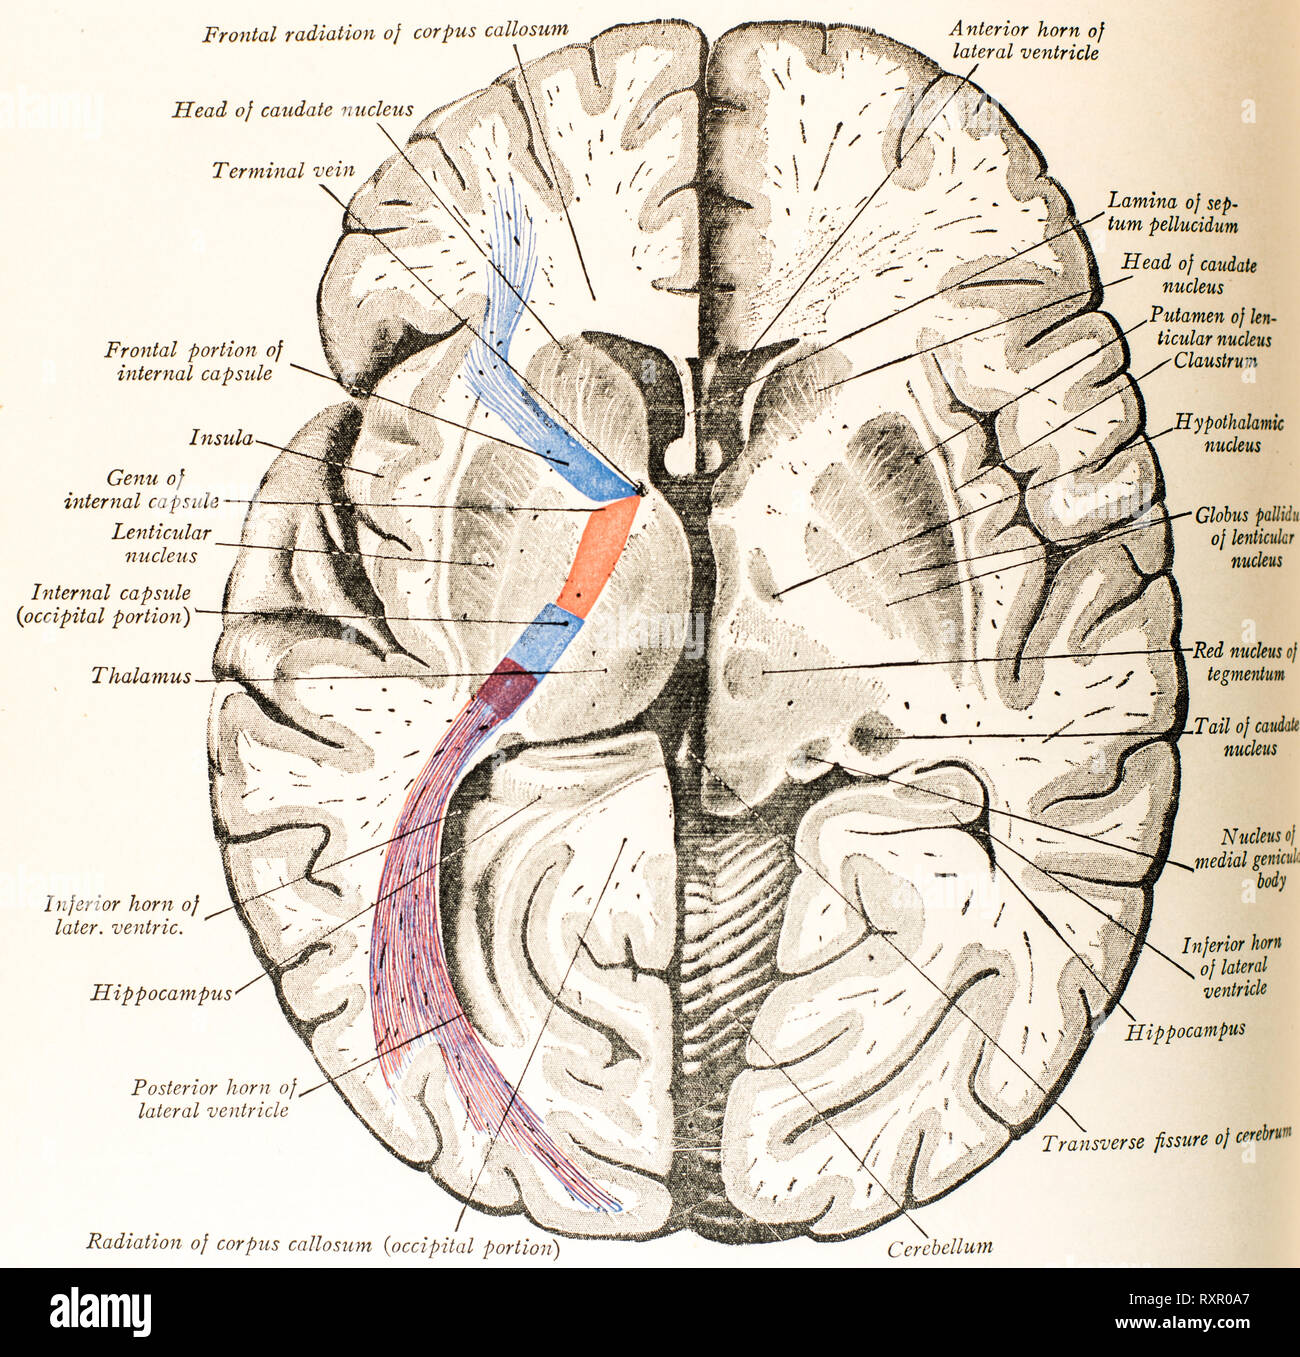 Anatomy of the Human Brain and its related structures Stock Photo - Alamy